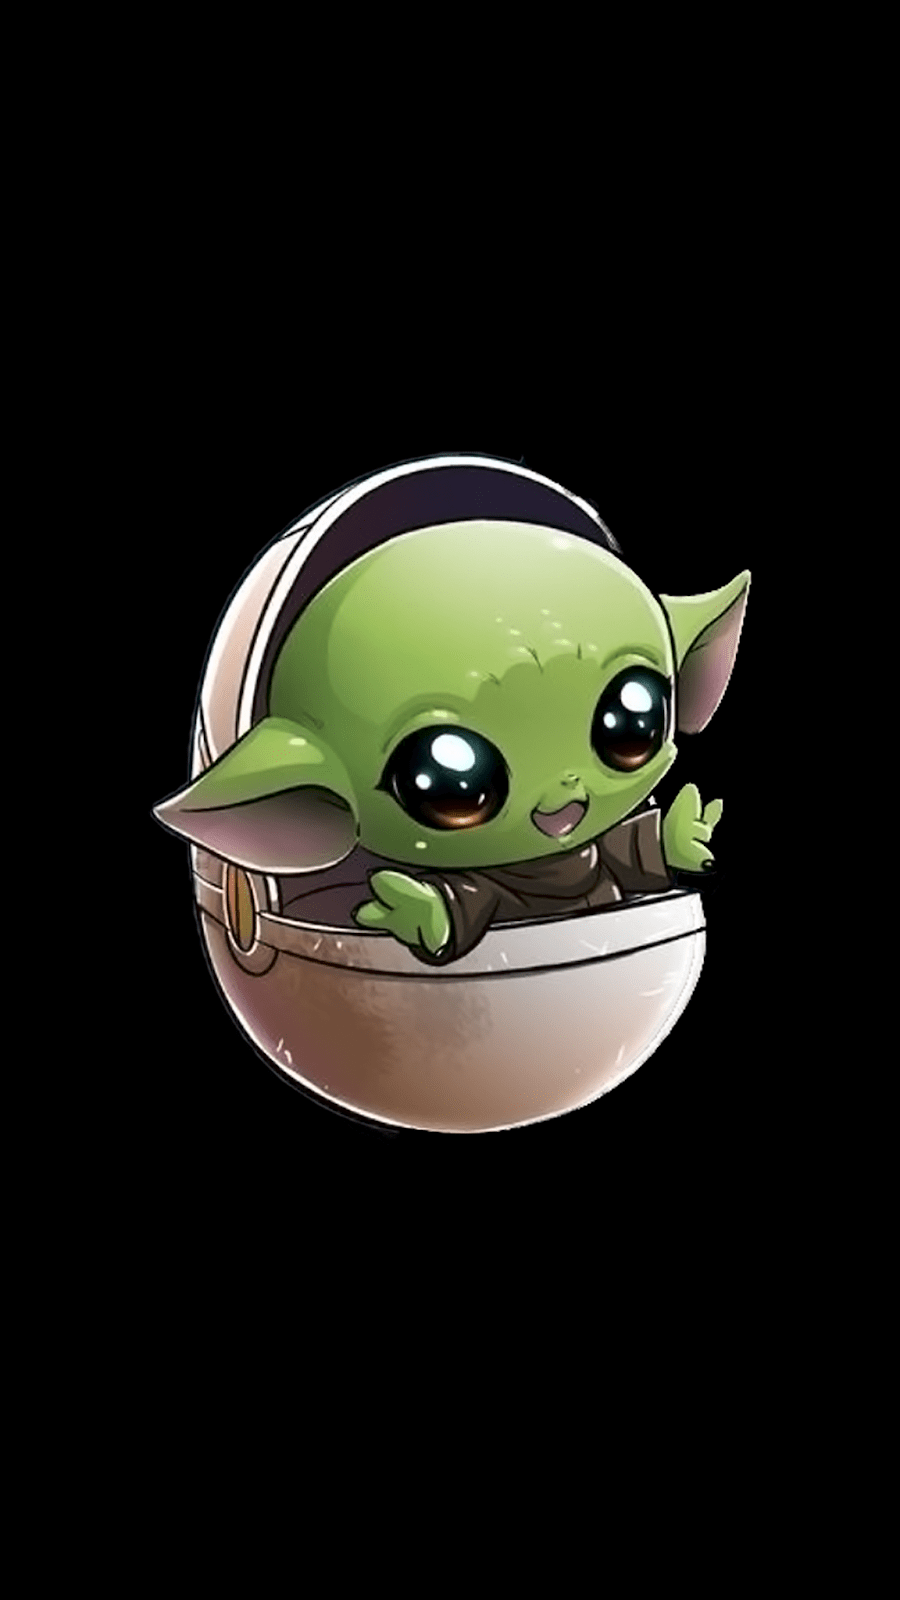 Baby Yoda And Stitch Wallpapers